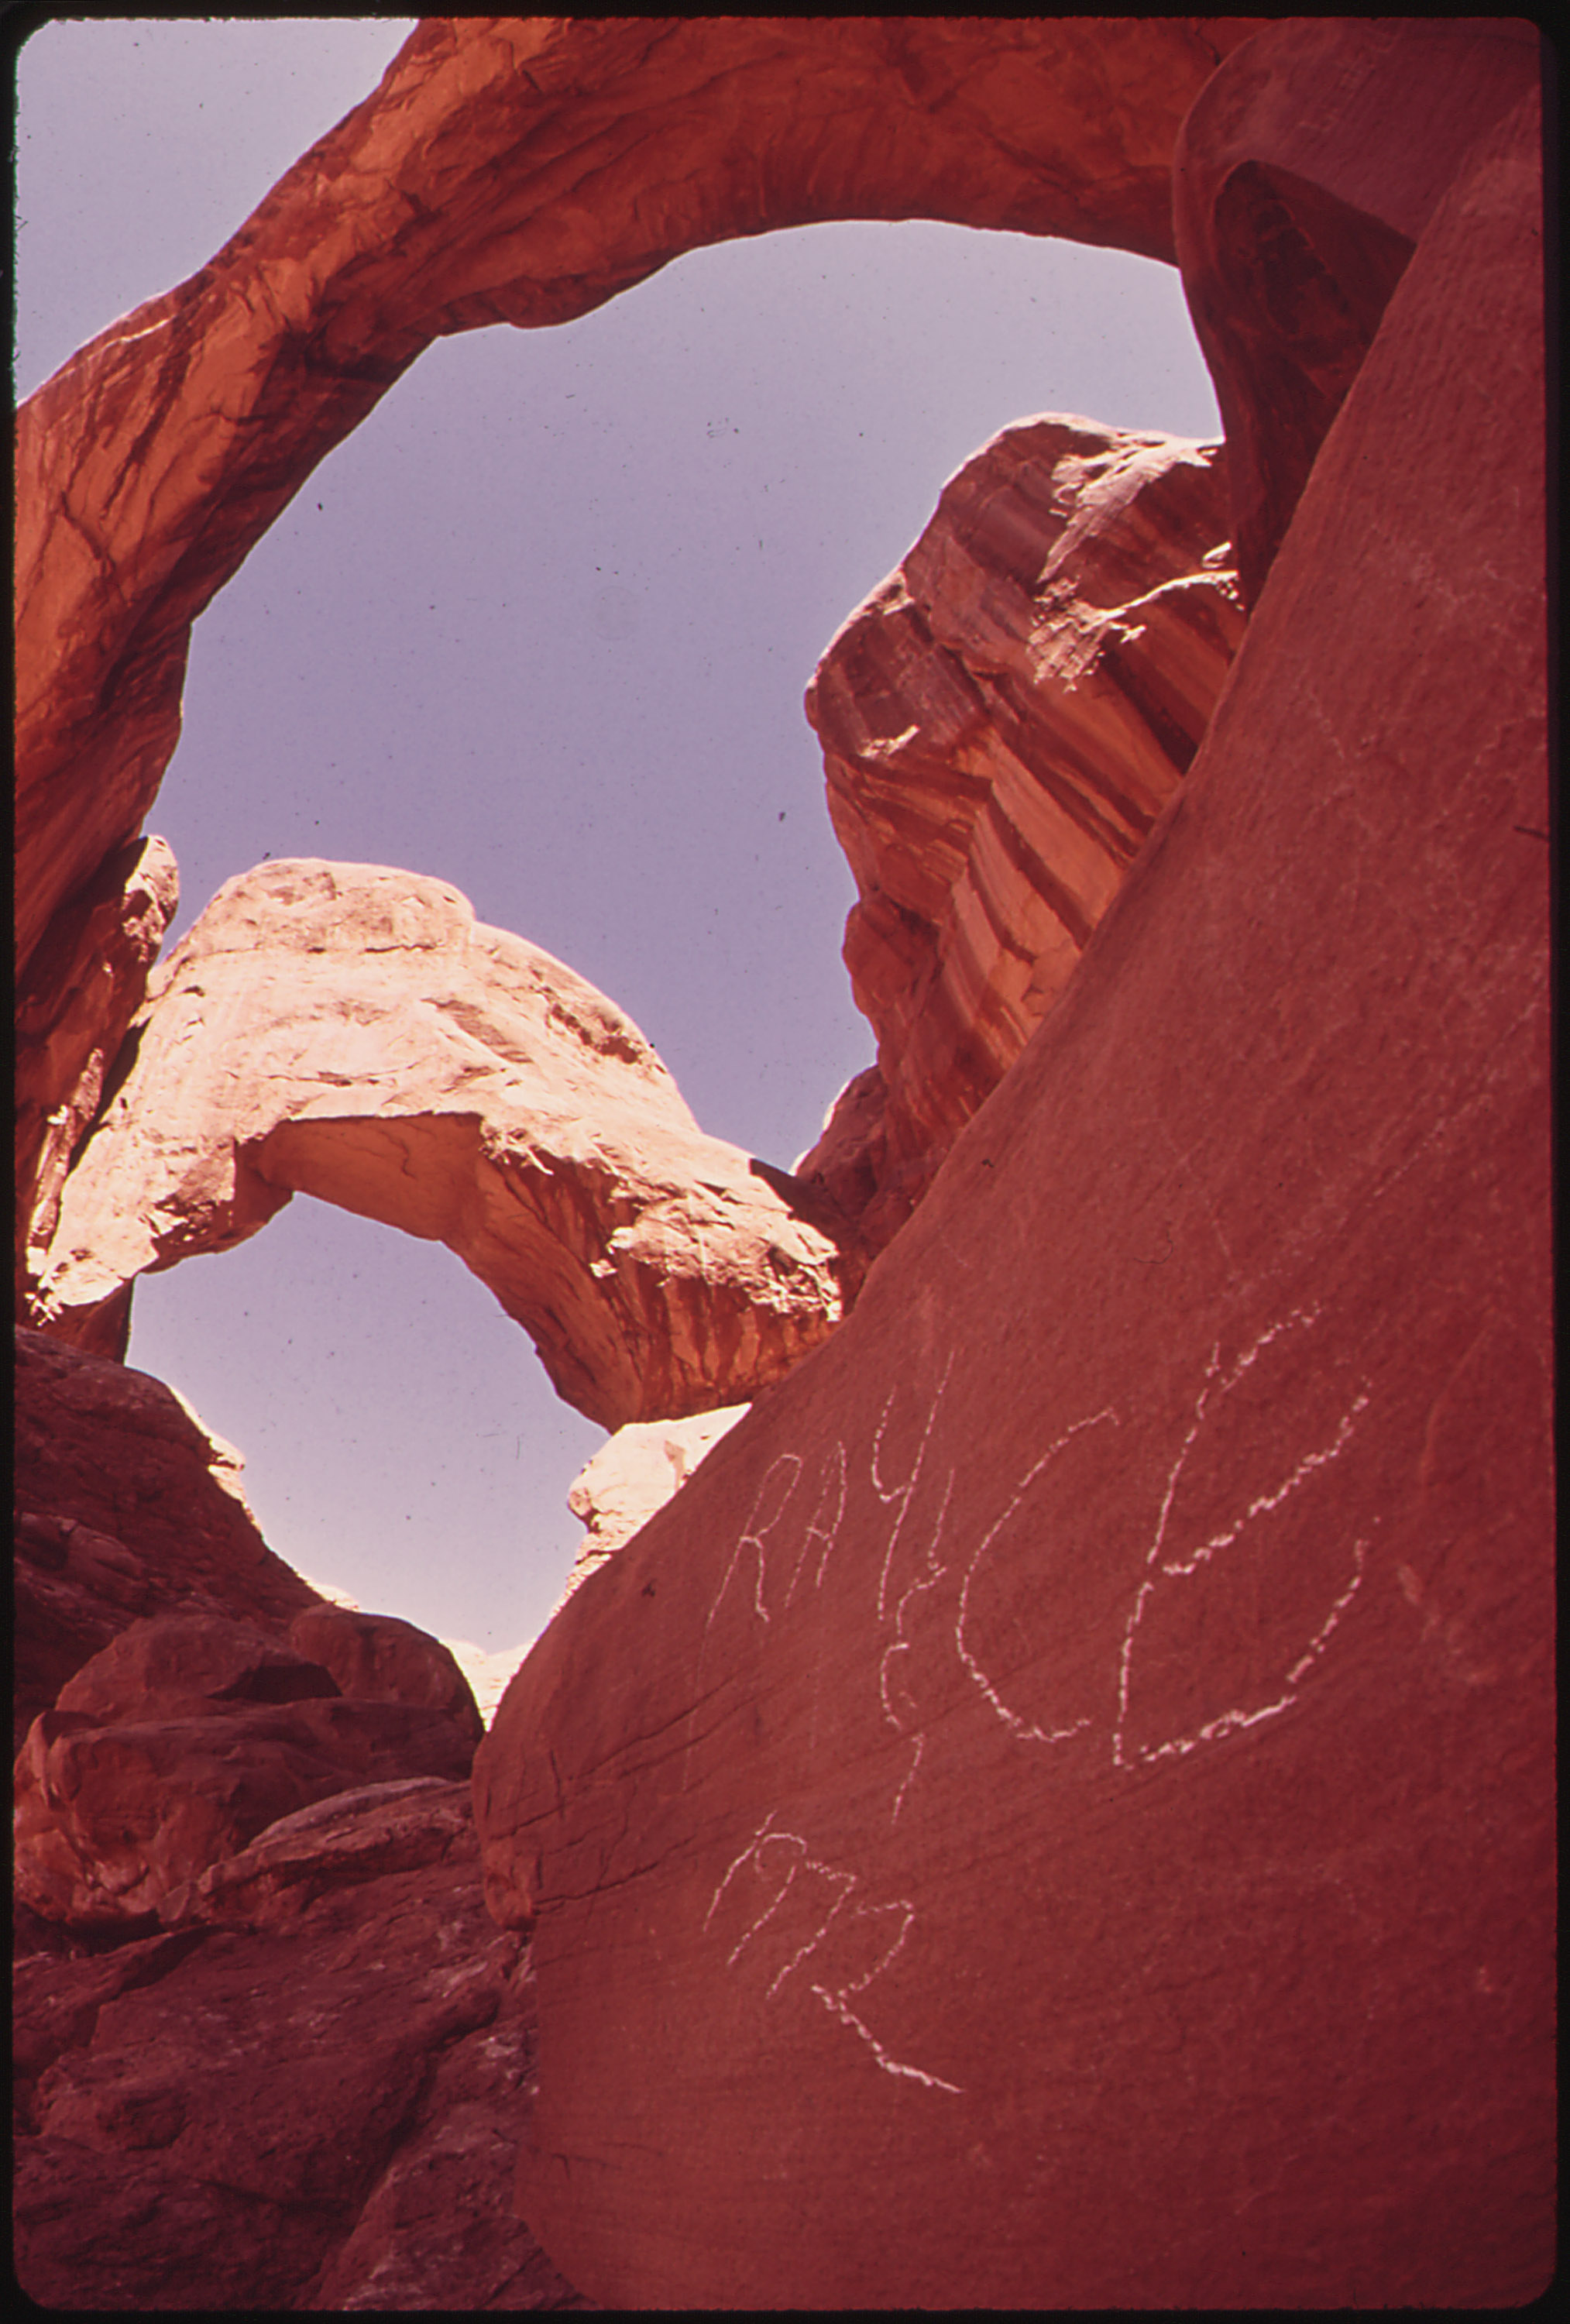 Double Arch in Windows Section of Arches National Park Windows Is One of the Parks Most Visited Areas. Graffiti on Rock Is Common Kind of Vandalism, 05/1972